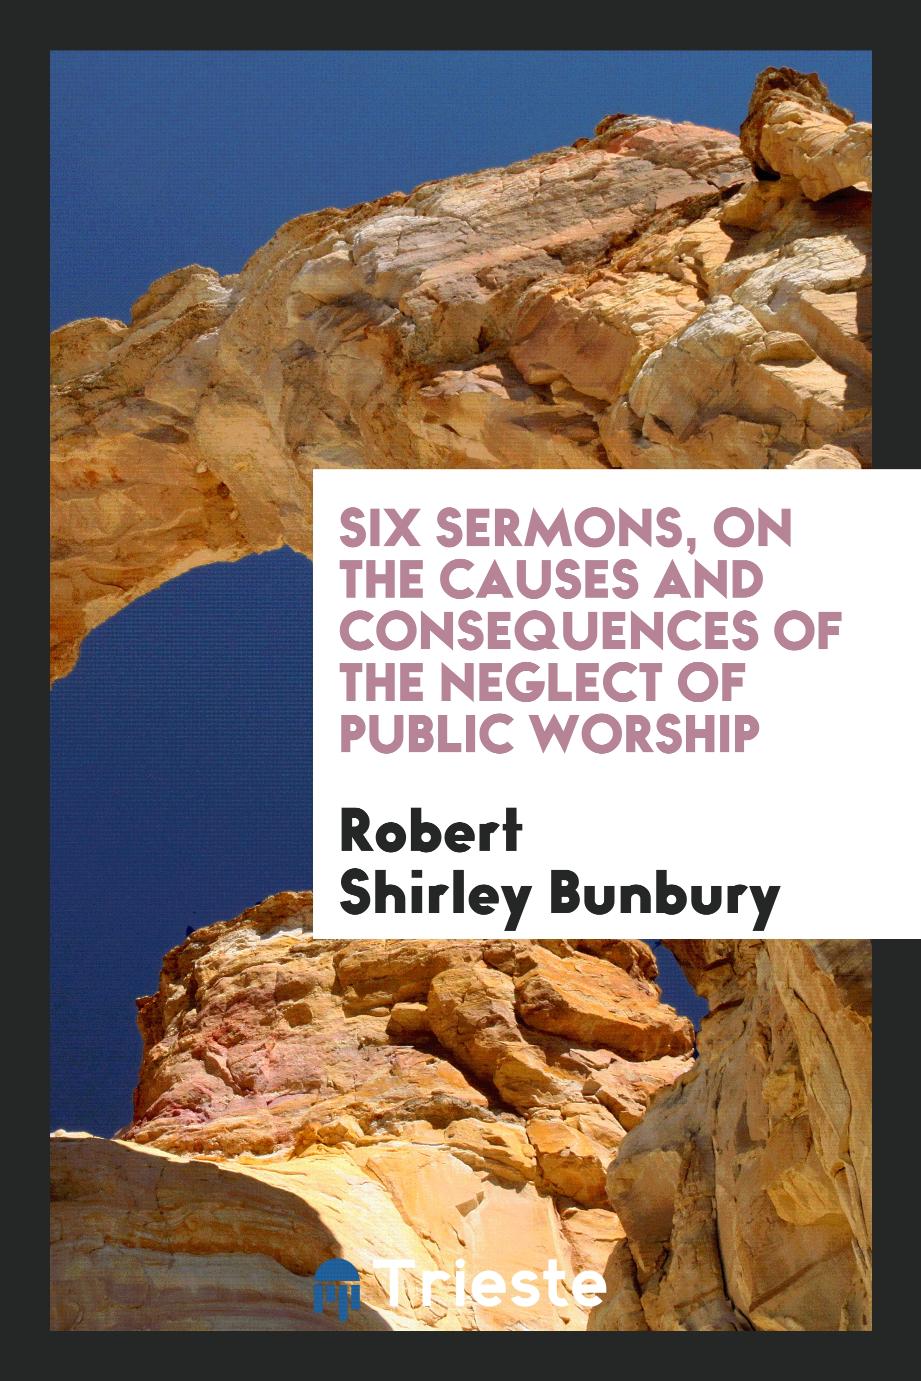 Six Sermons, on the Causes and Consequences of the Neglect of Public Worship